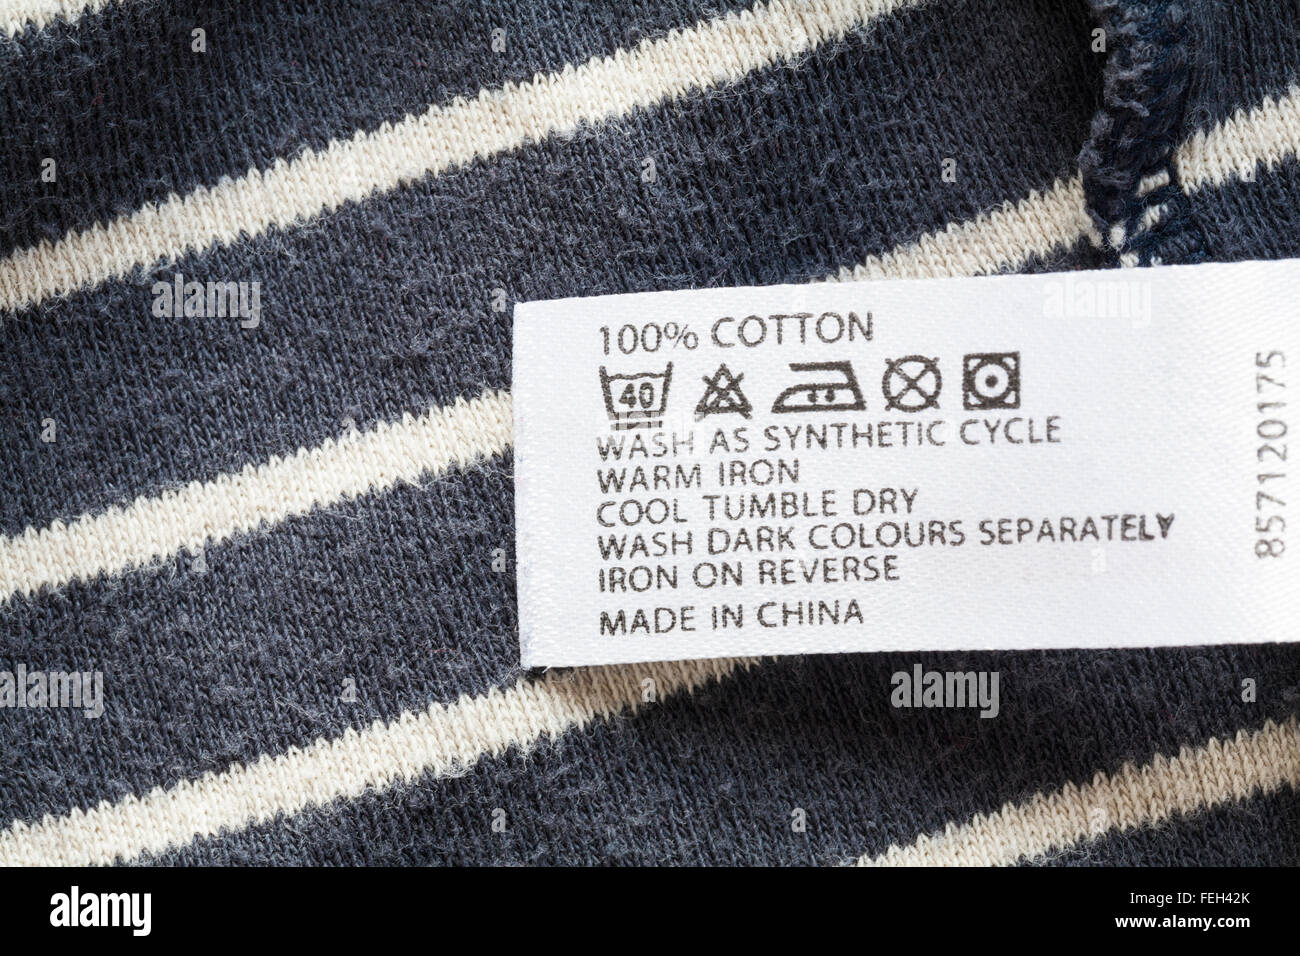 Label in 100% cotton garment made in China with care instructions ...